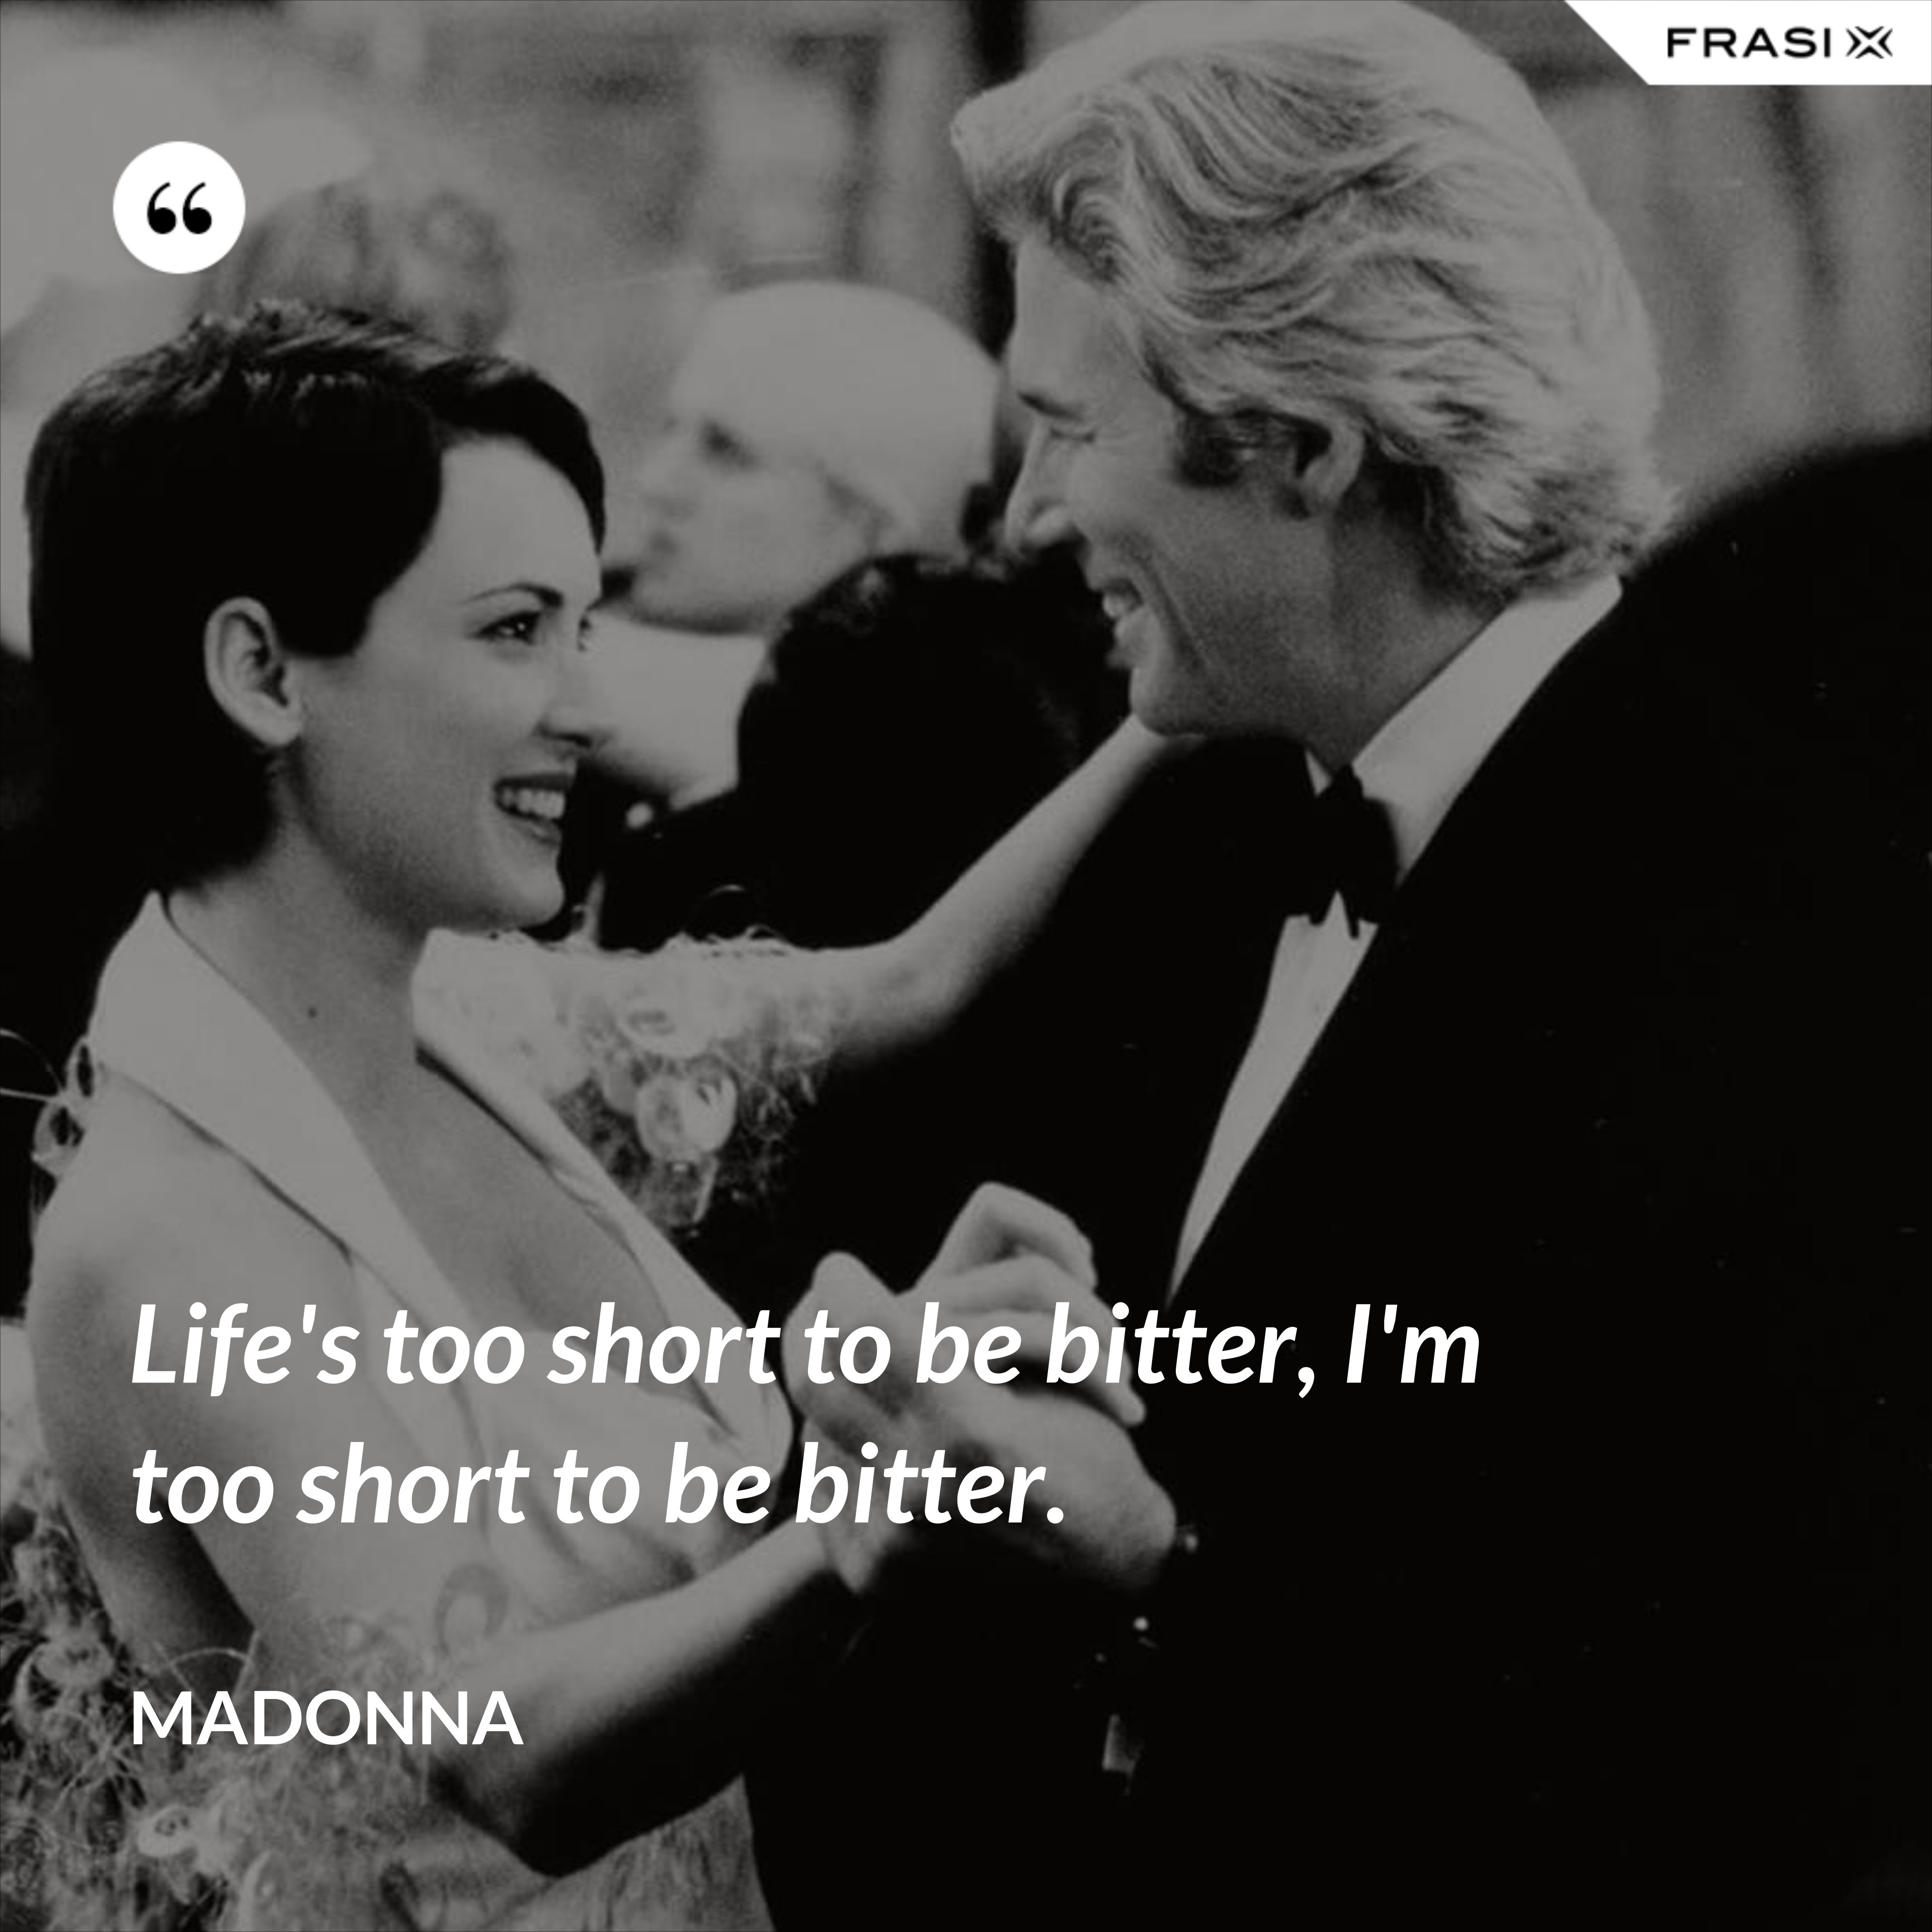 Life's too short to be bitter, I'm too short to be bitter. - Madonna